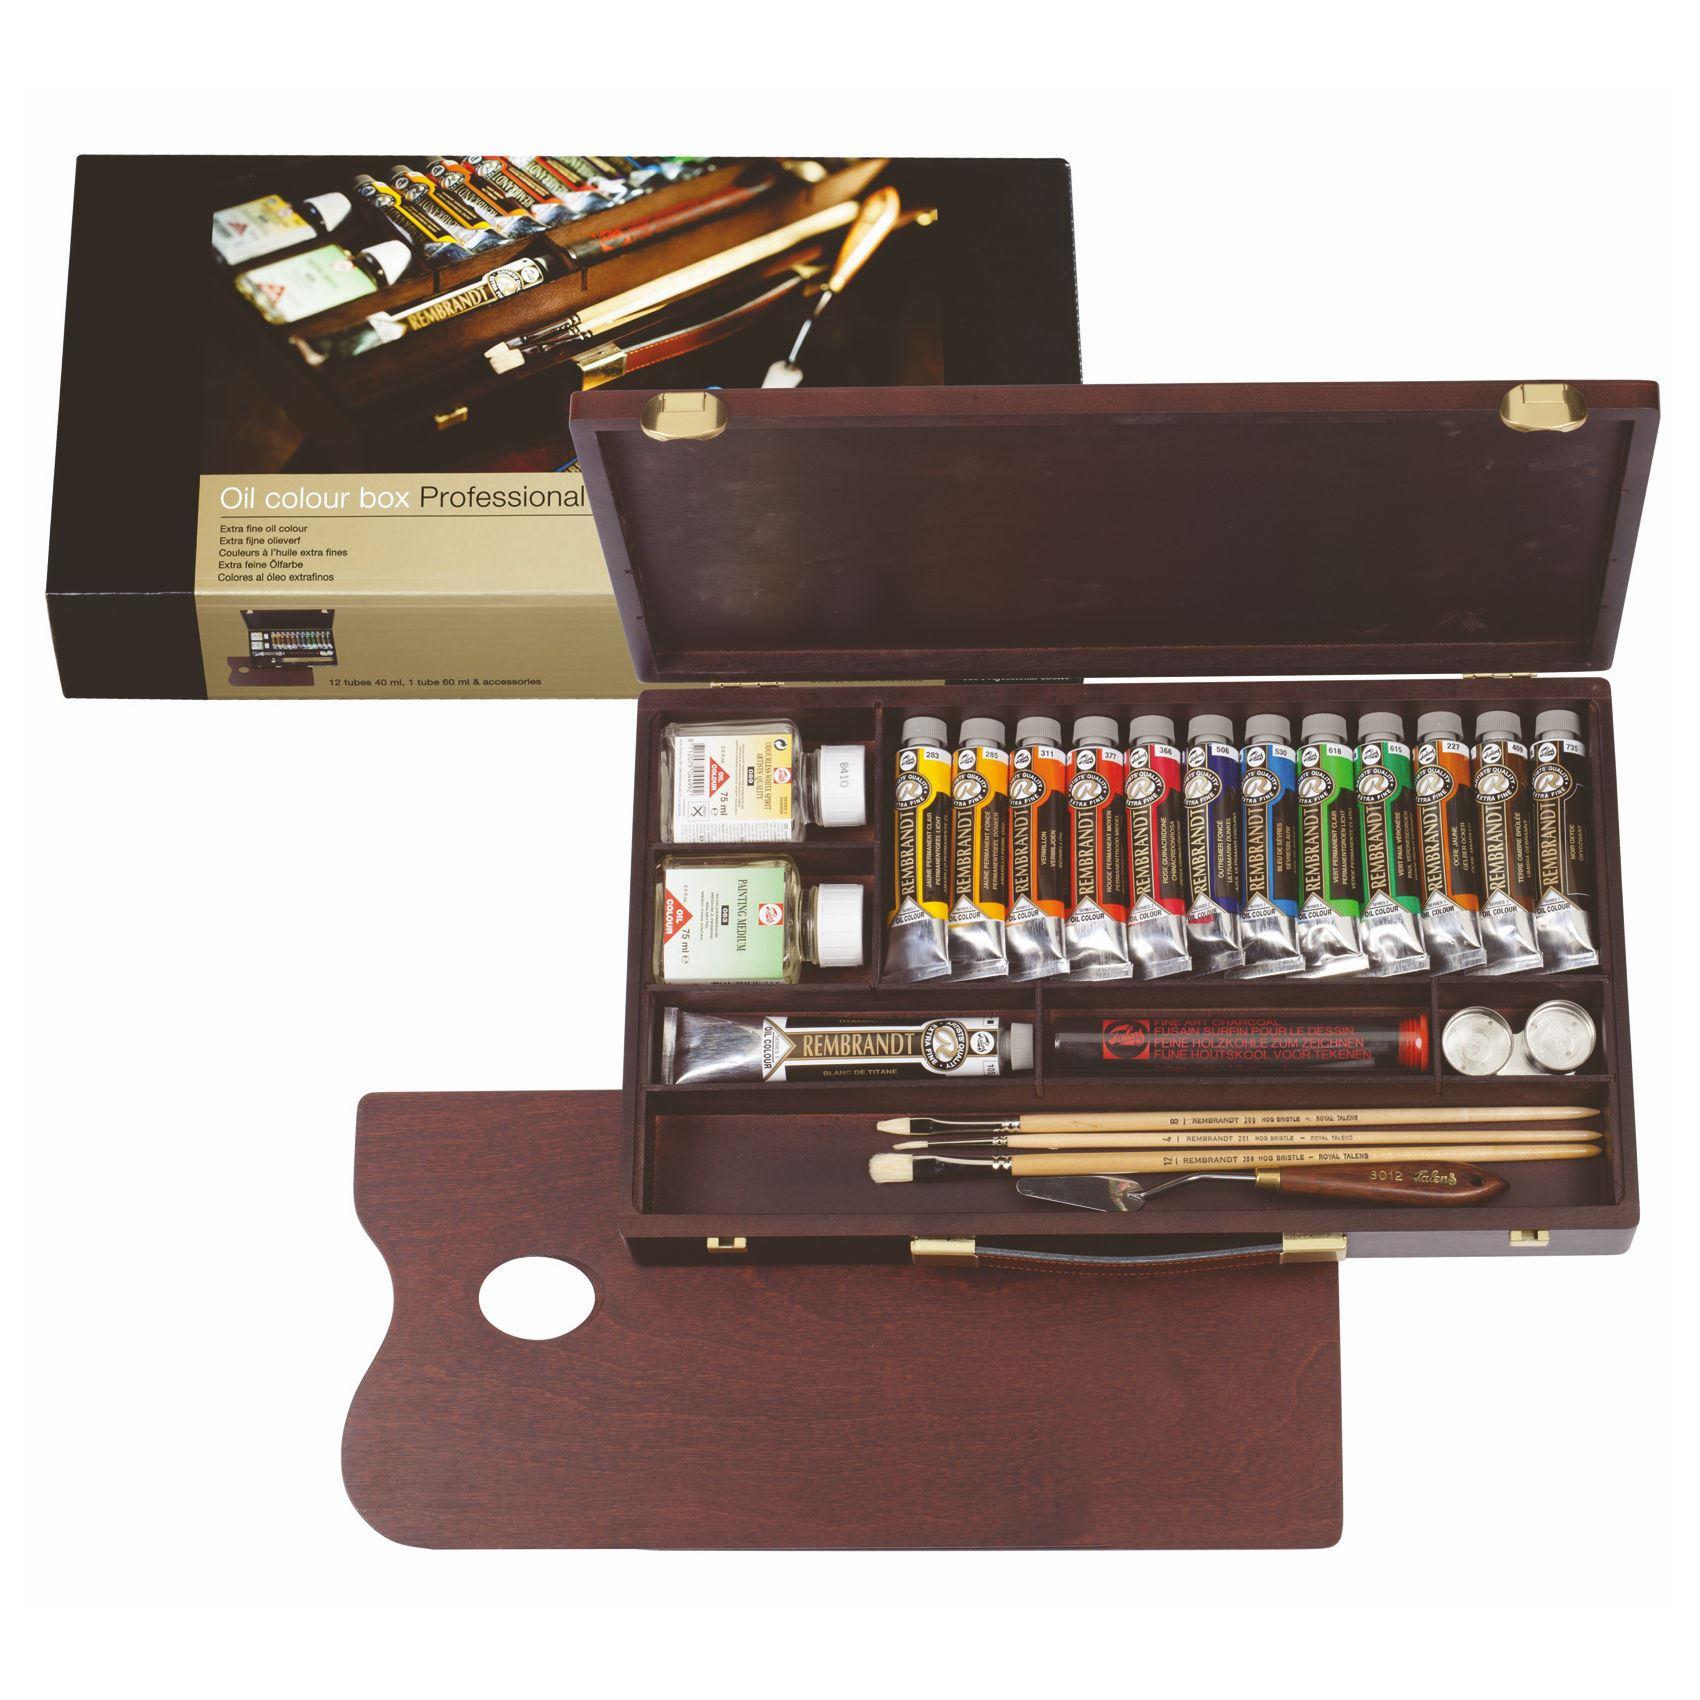 Royal Talens Rembrandt range of paints are the professional level designed with no compromise on pigment quality and light fastness. These are truly the best paints professional box sets of oil paints